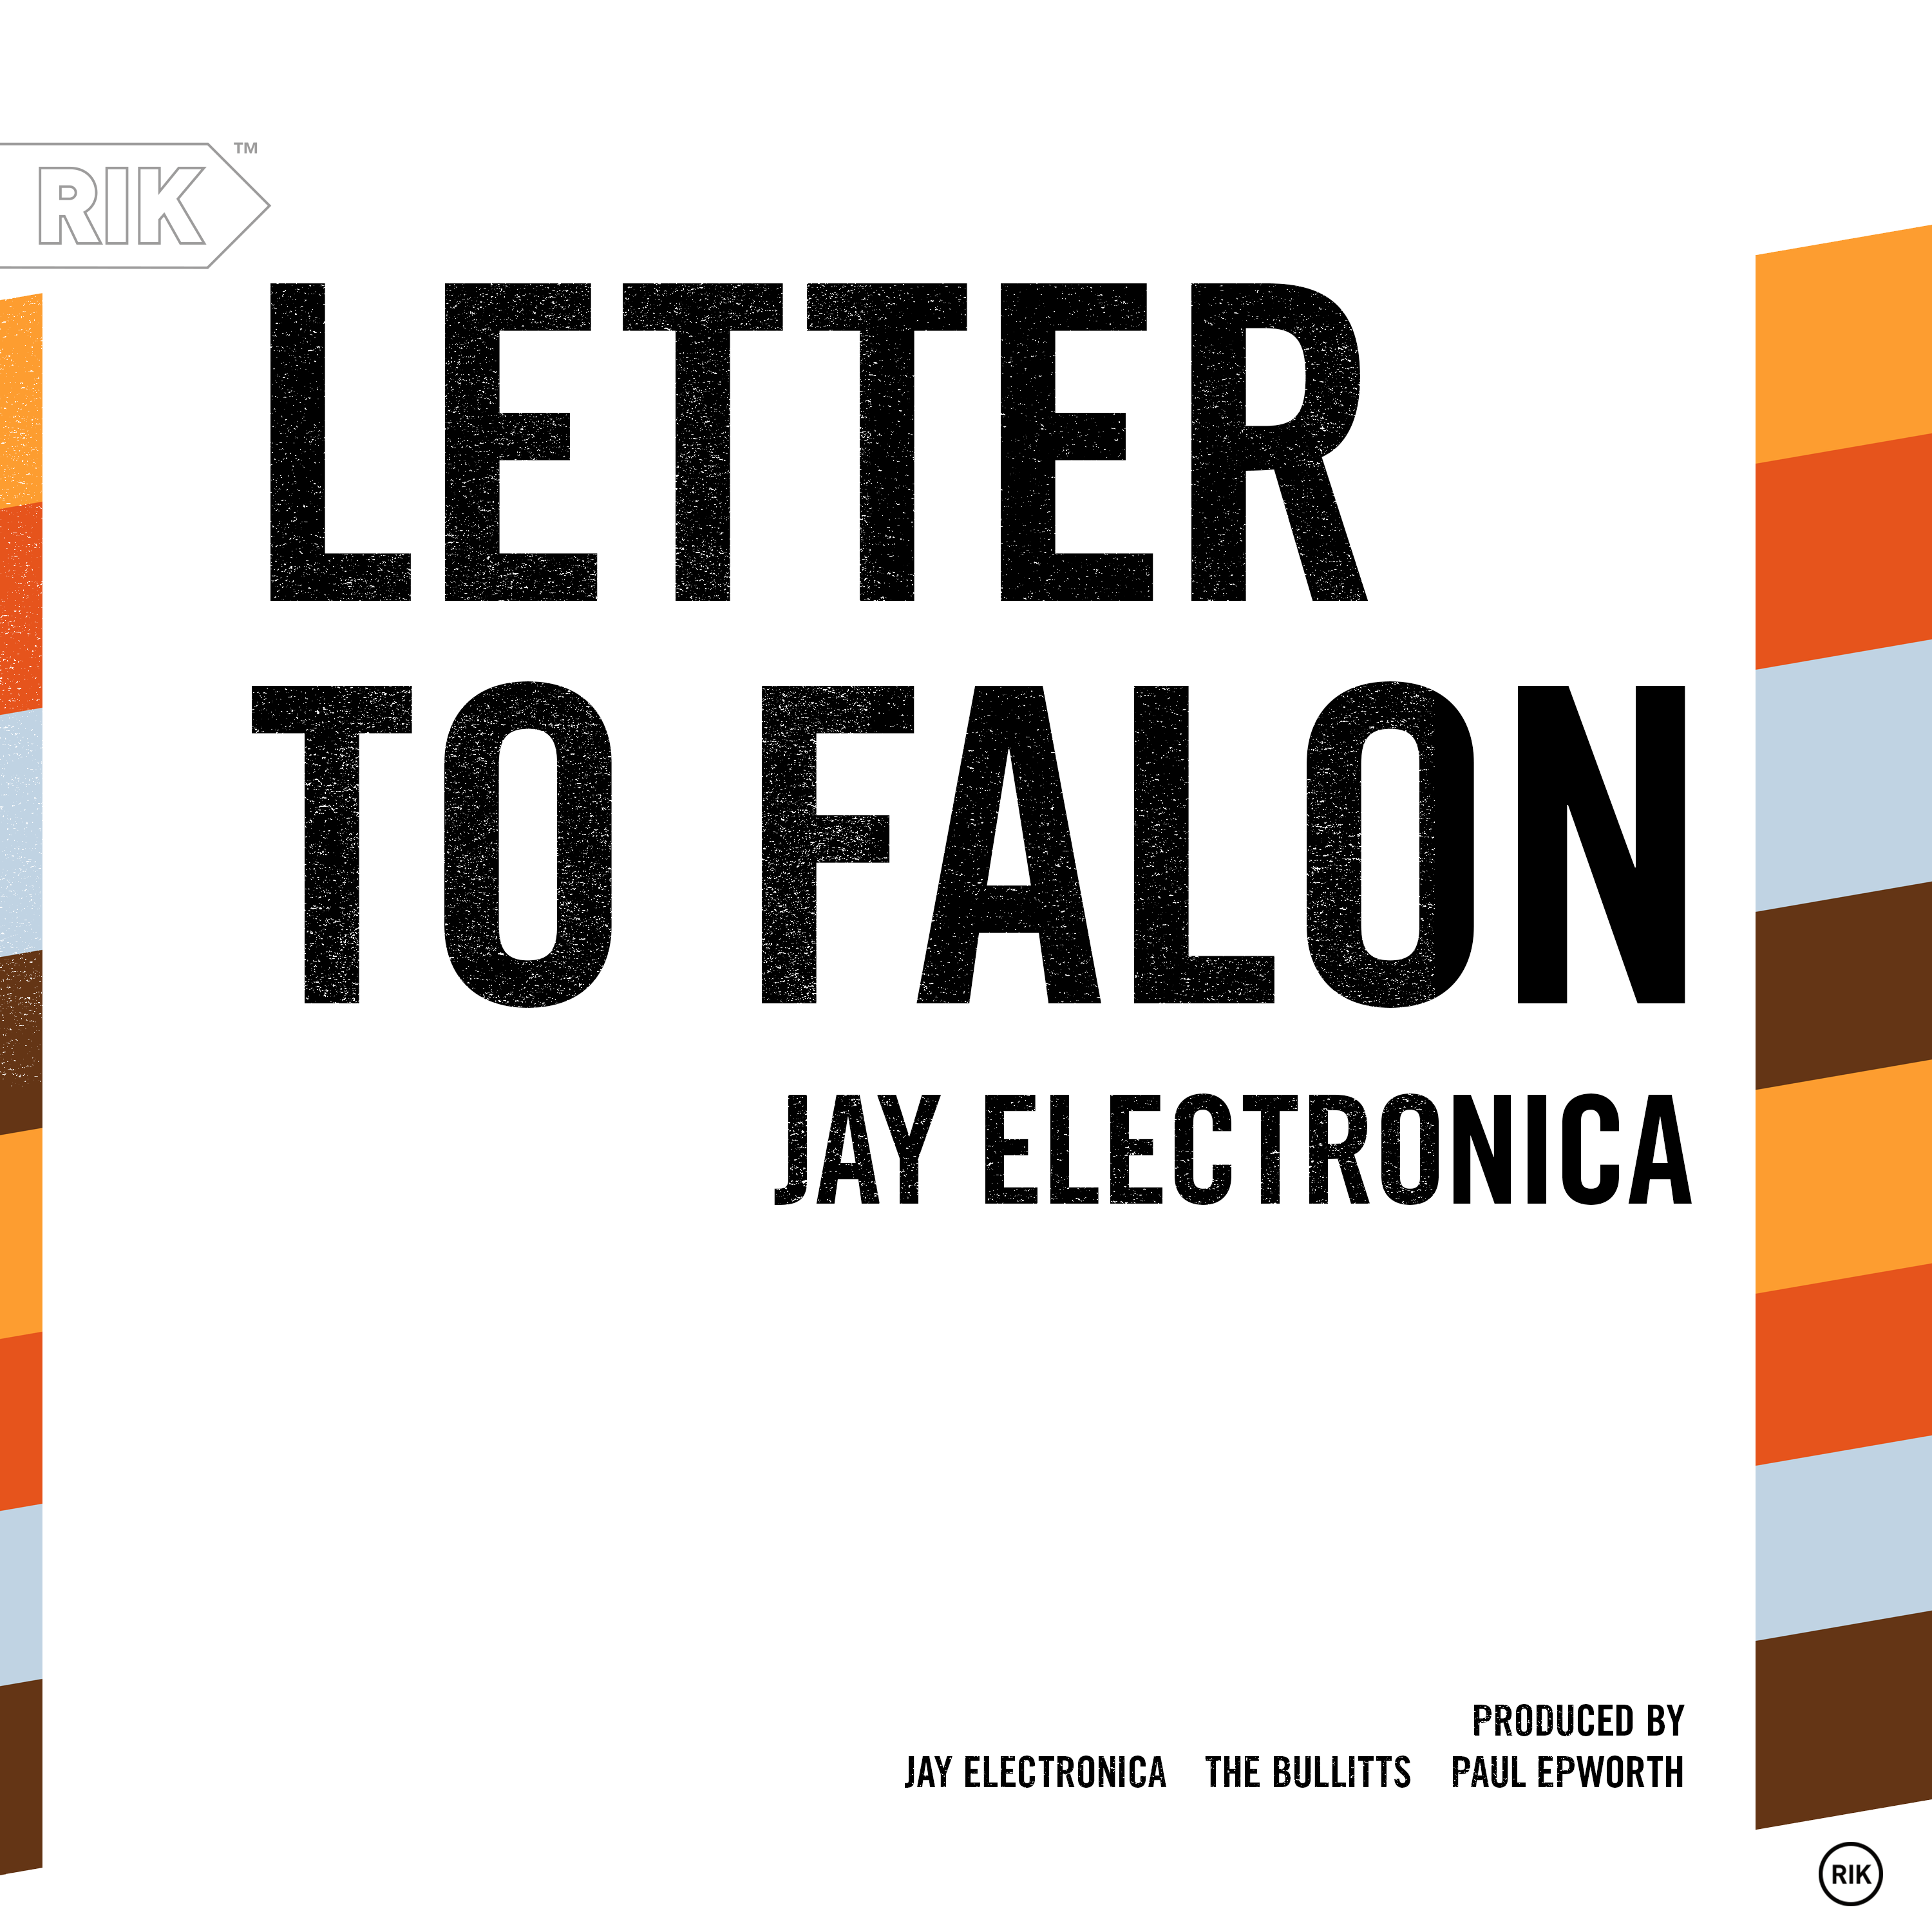 Jay Electronica — “Letter To Falon” produced by Jay Electronica, The Bullitts, & Paul Epworth